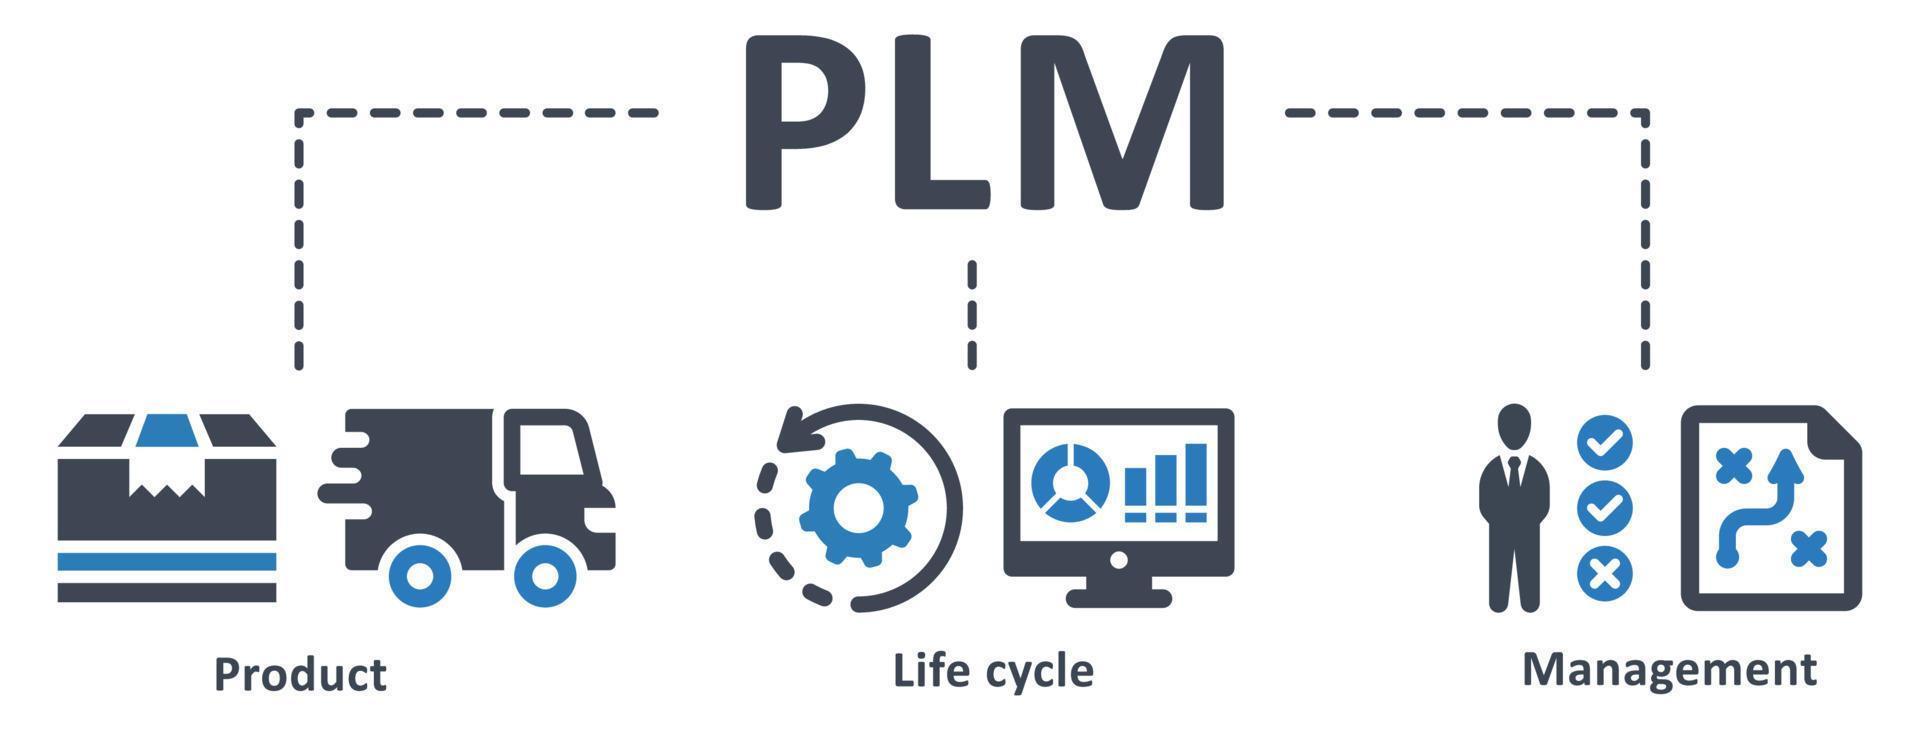 PLM icon - vector illustration . plm, product, life cycle, management, innovation, development, manufacture, delivery, planning, strategy, infographic, template, concept, banner, icon set, icons .